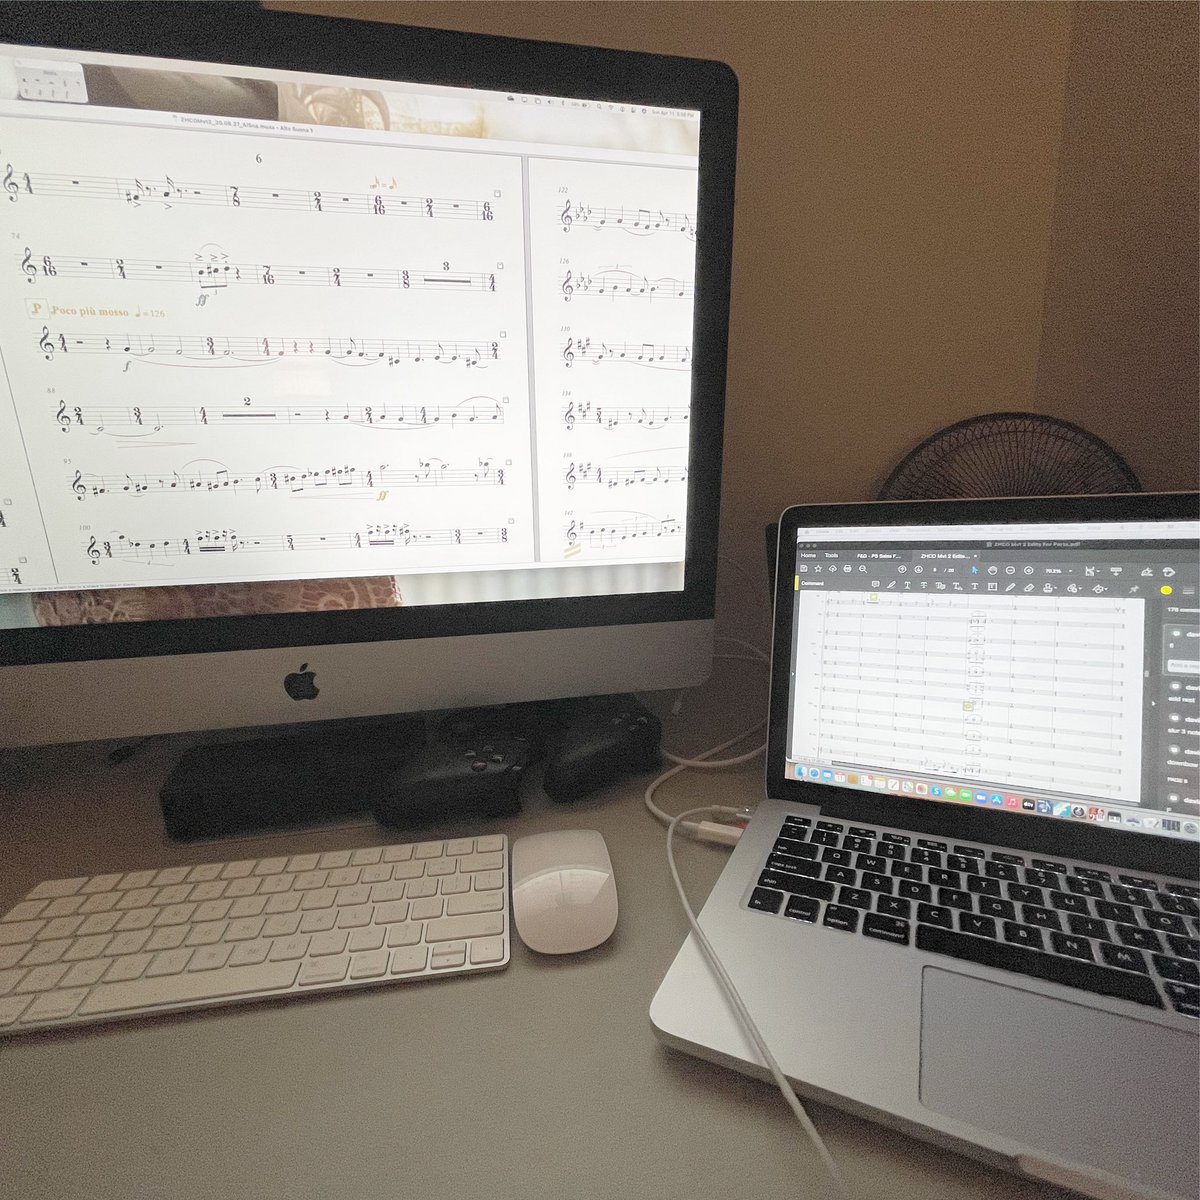 One of the most crucial steps in music preparation is making sure everything matches between the score and parts.

#suremusicservices #musicprep #classicalmusic #newmusic #score #musicpreparation #copying #engraving #musician #classicalmusician